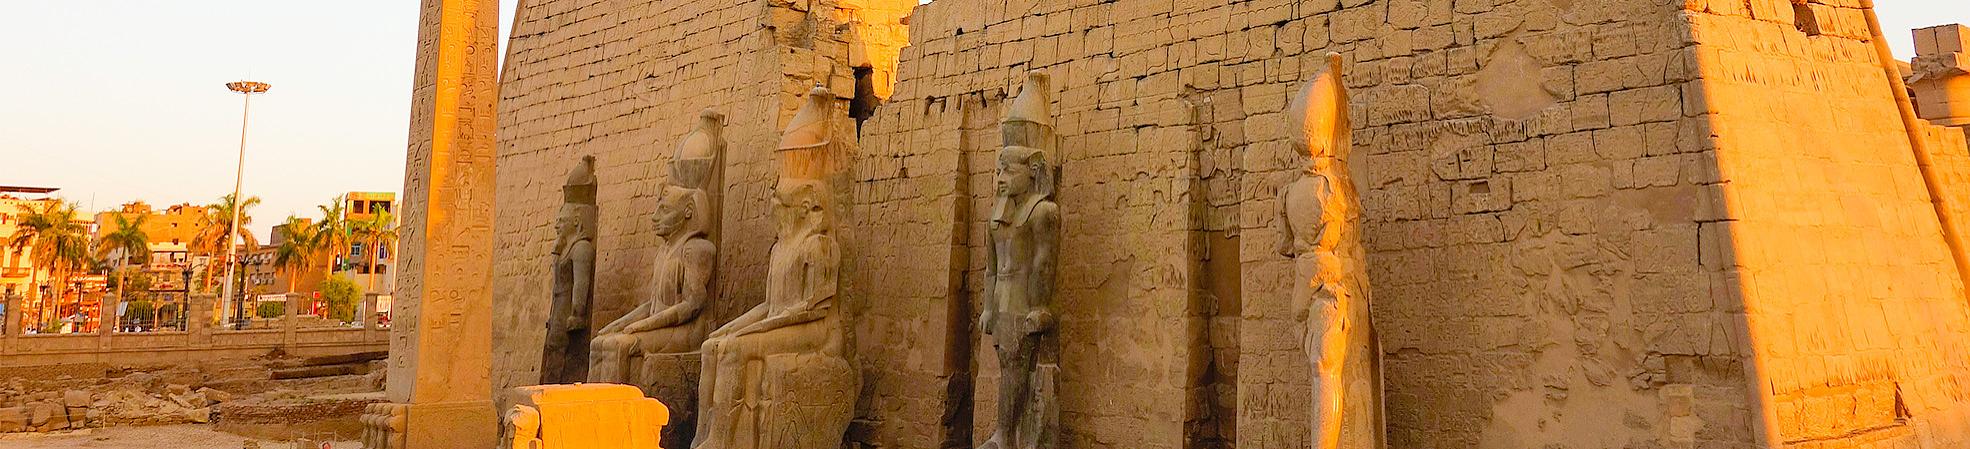 Top 10 Attractions to Visit in Egypt